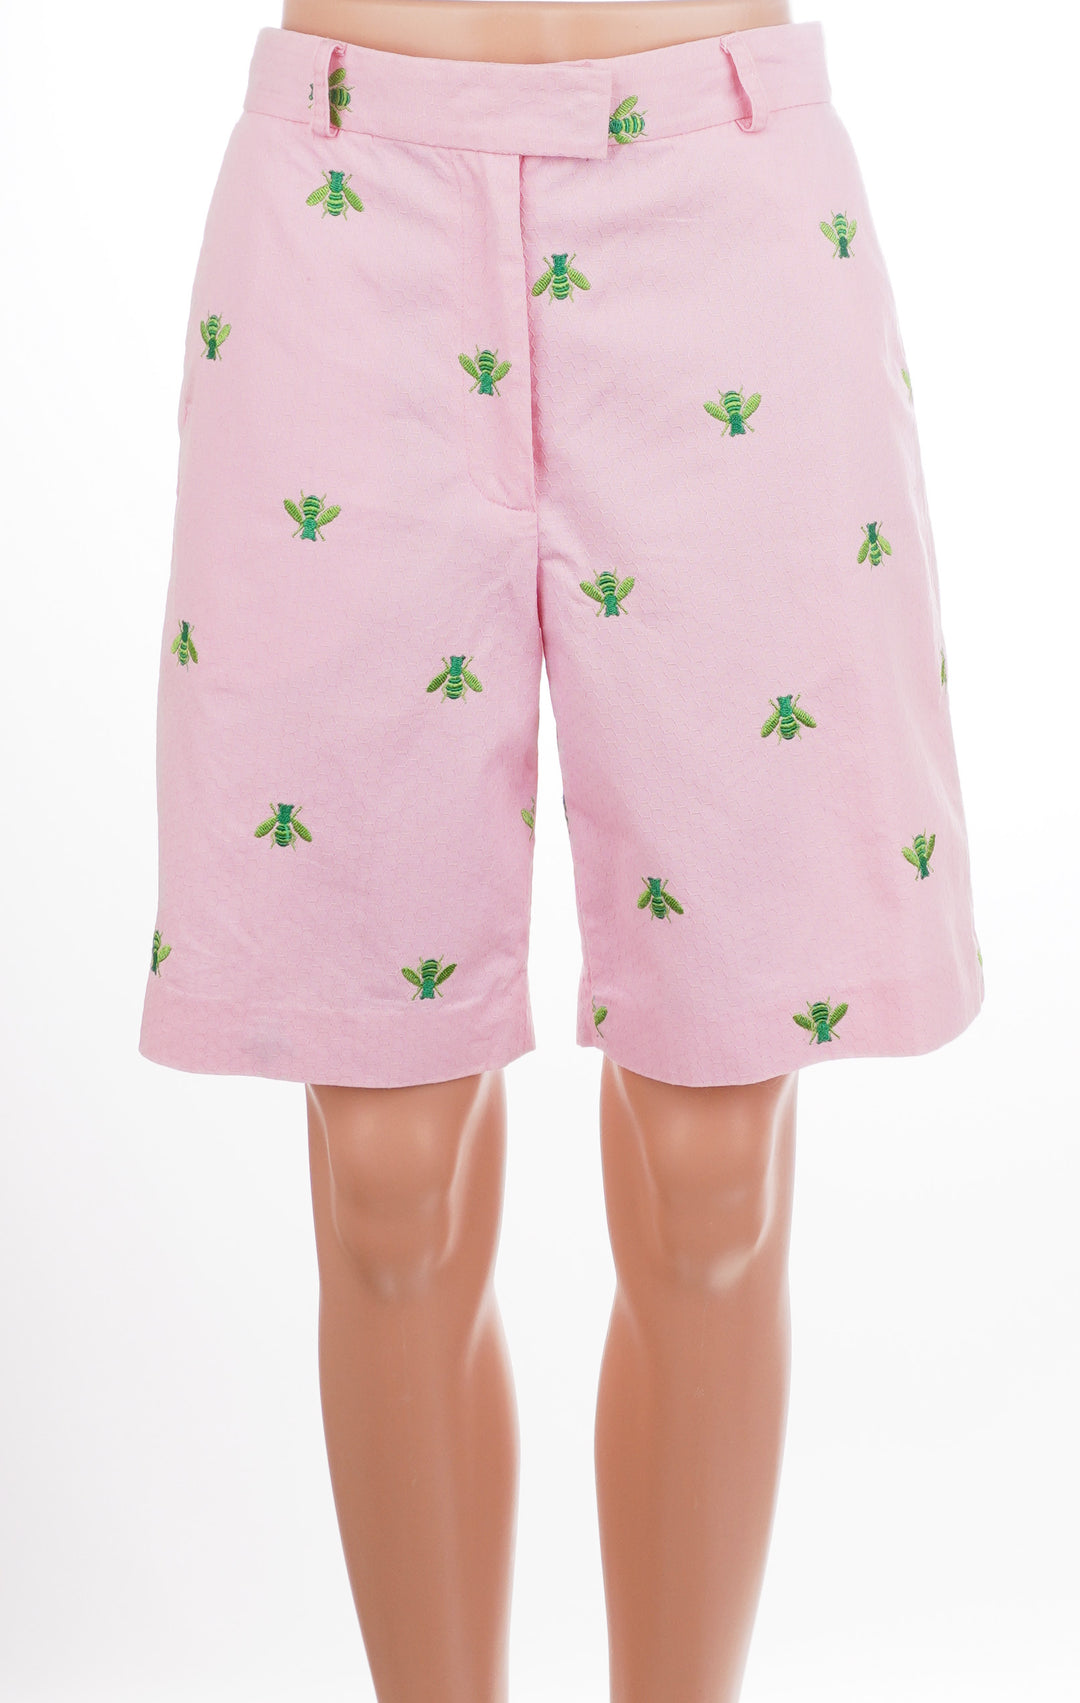 Lilly Pulitzer Honeycomb Bee Shorts - Pink/Green - Size 2